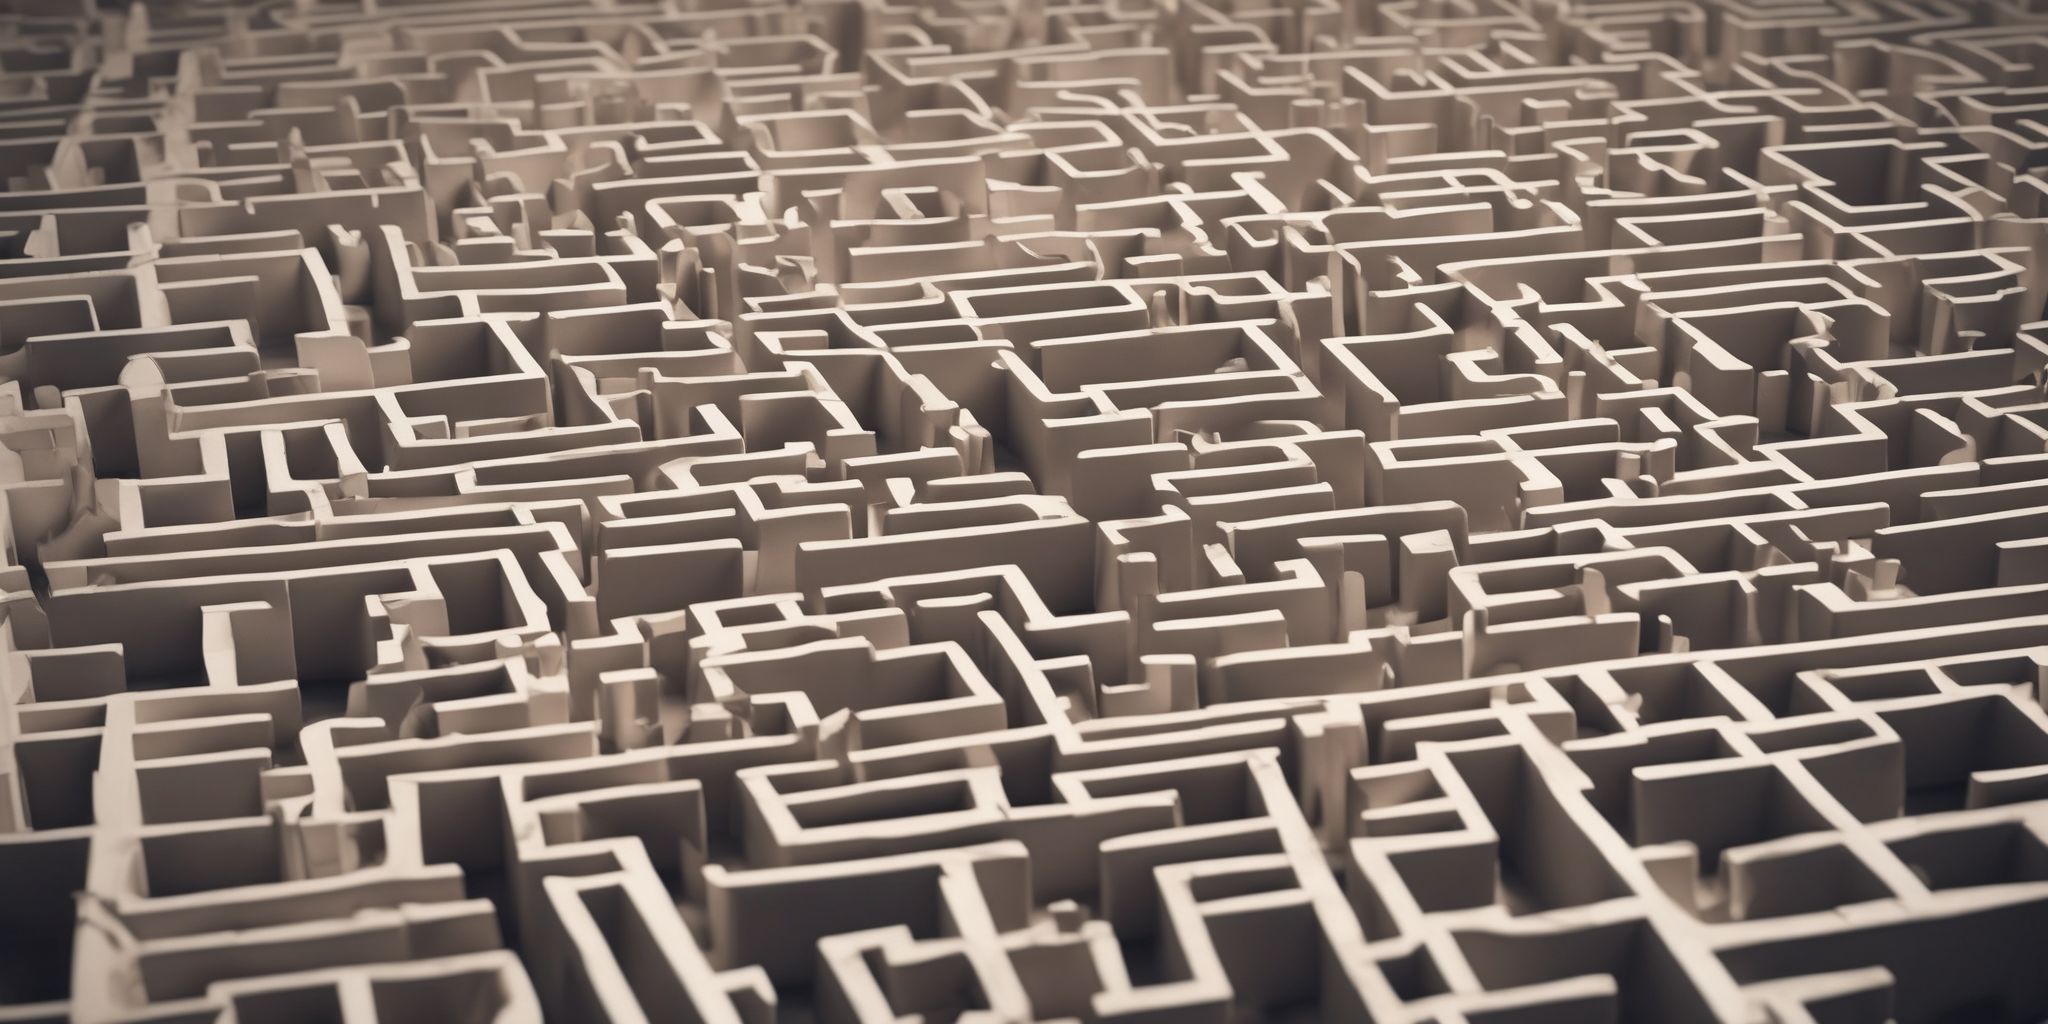 Tax maze  in realistic, photographic style